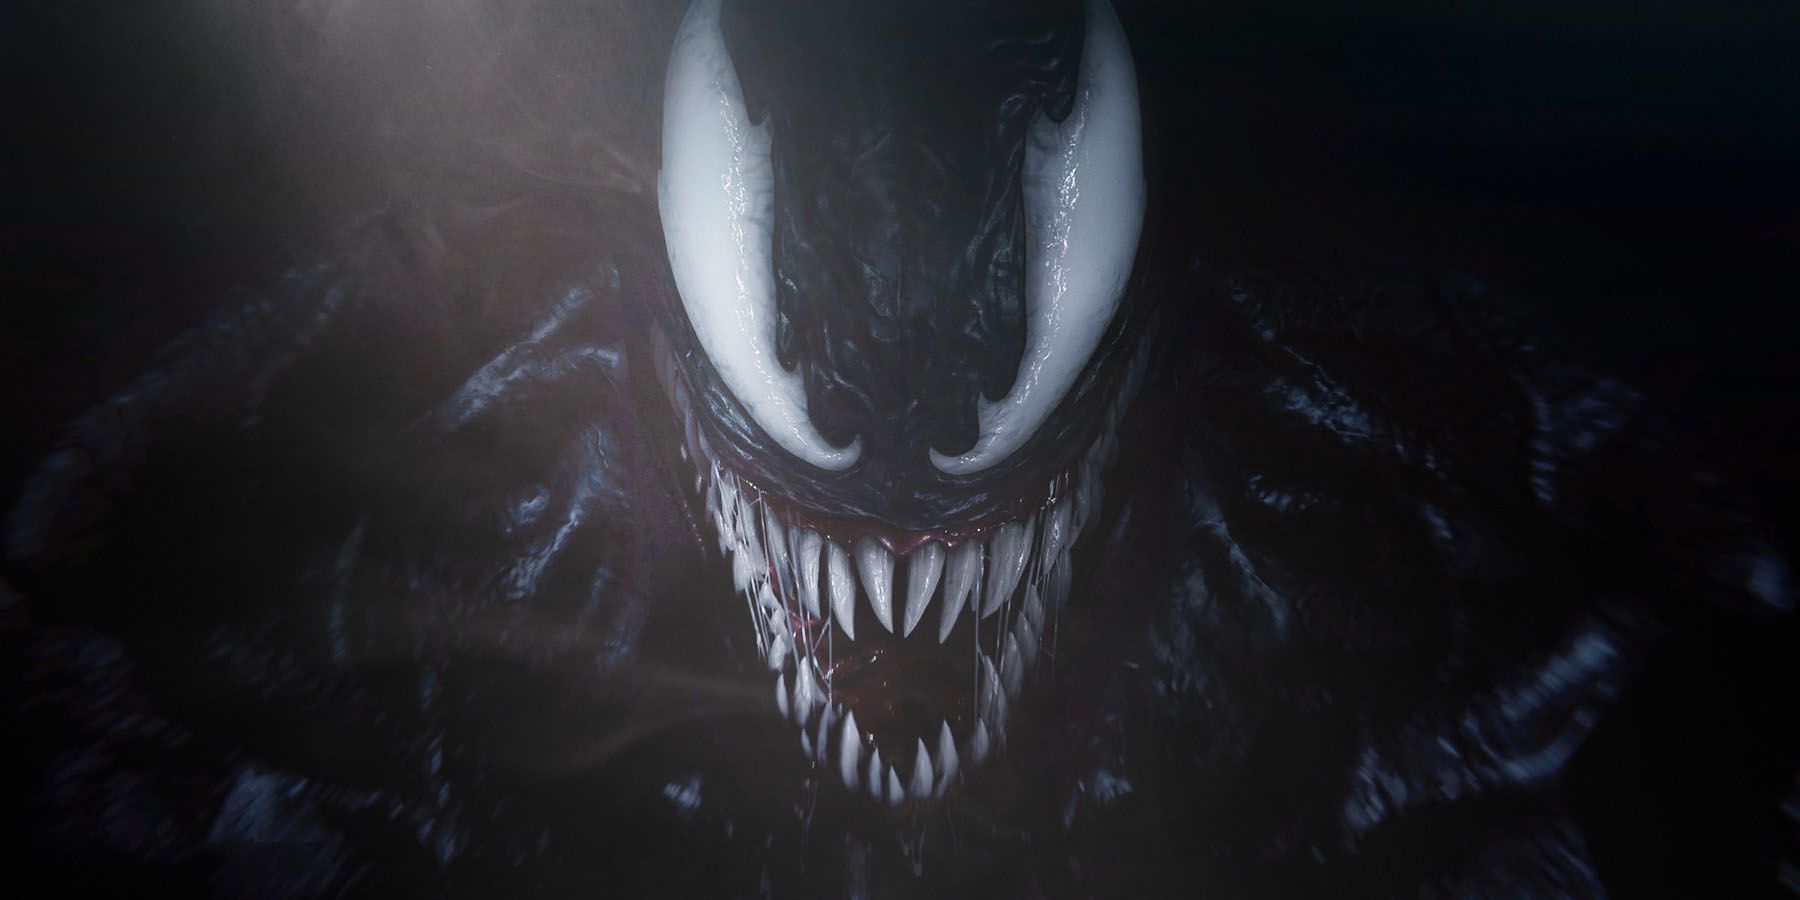 A close-up screenshot of Venom emerging from the shadows in Marvel's Spider-Man 2.